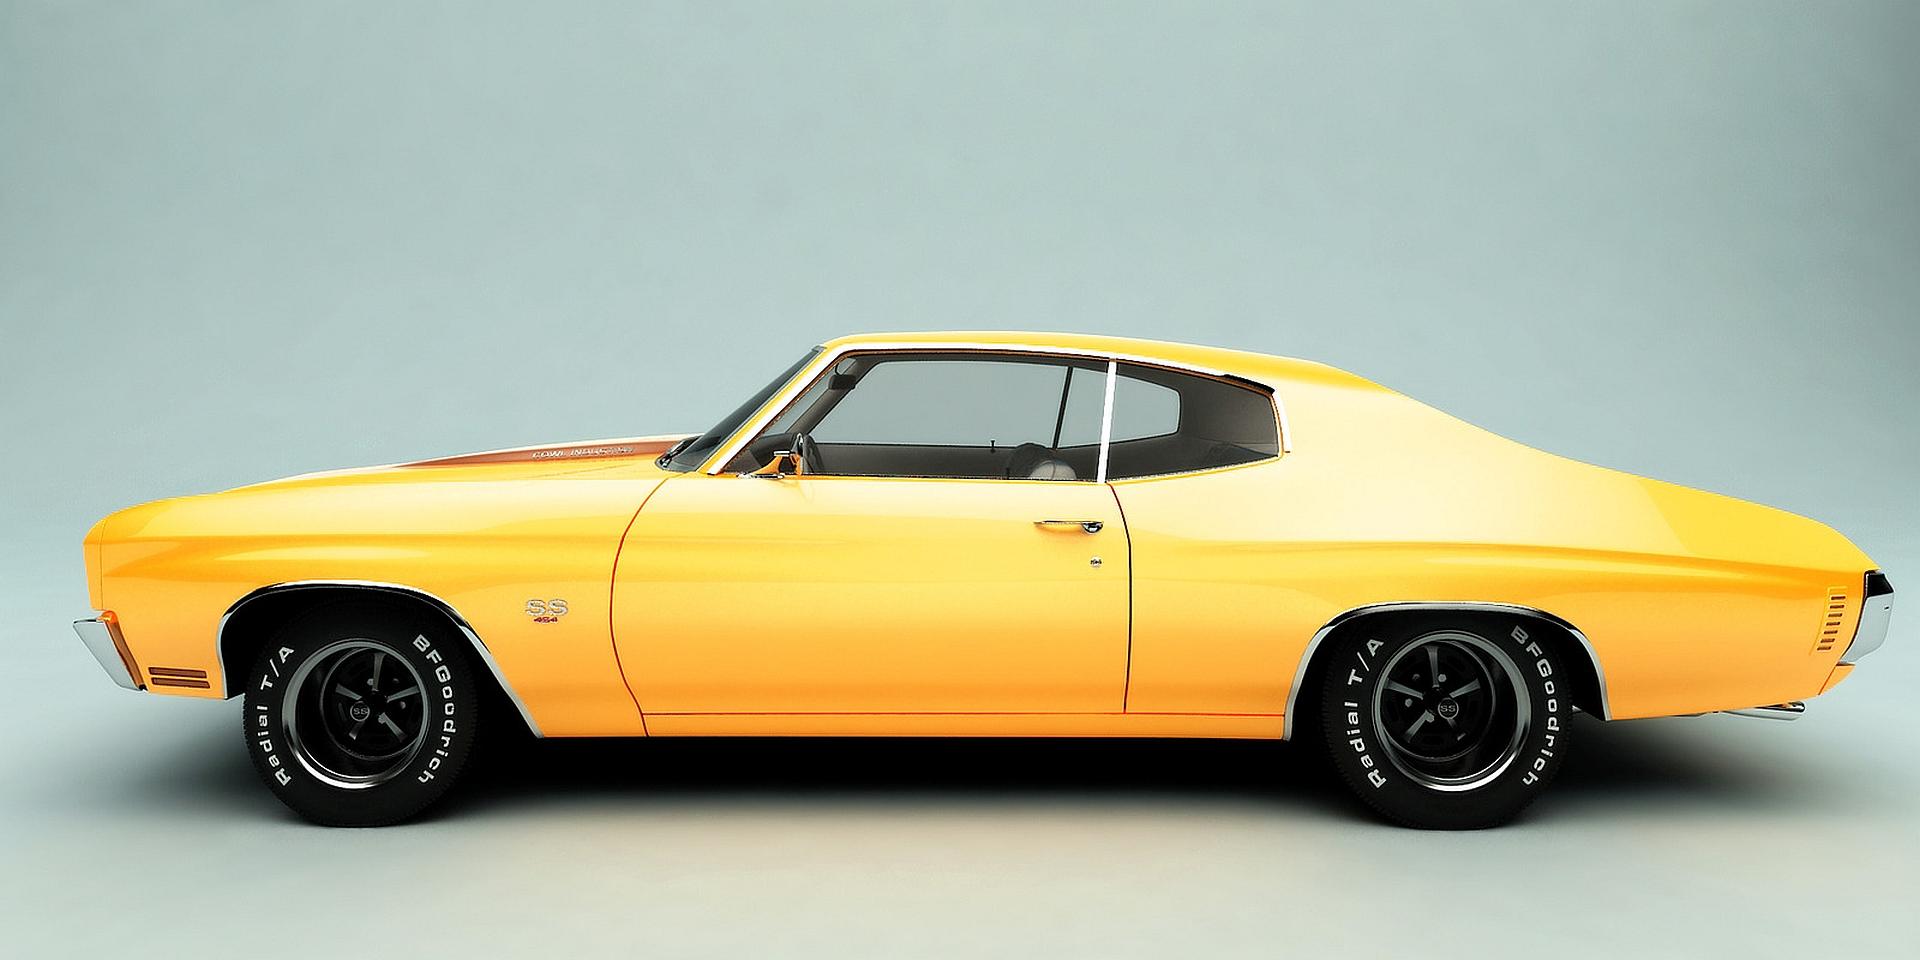 Chevrolet Chevelle Wallpapers HD Download 1920x960